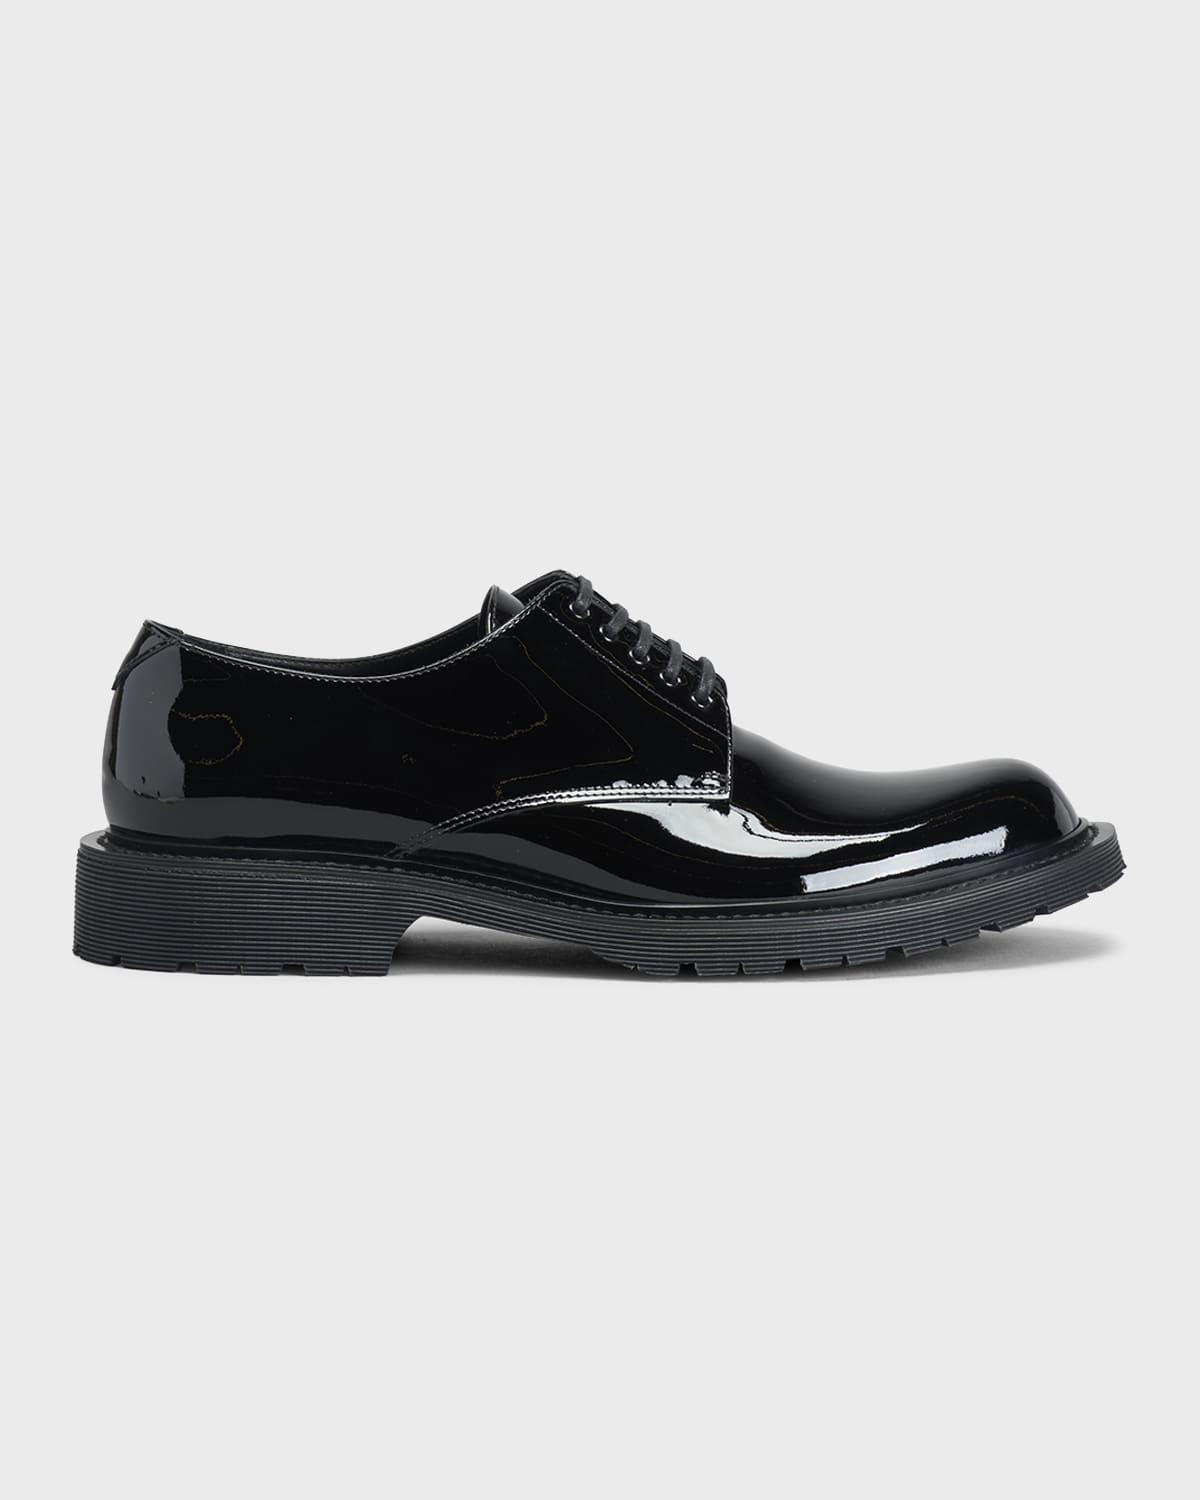 Mens Fermin Leather Derby Shoes Product Image